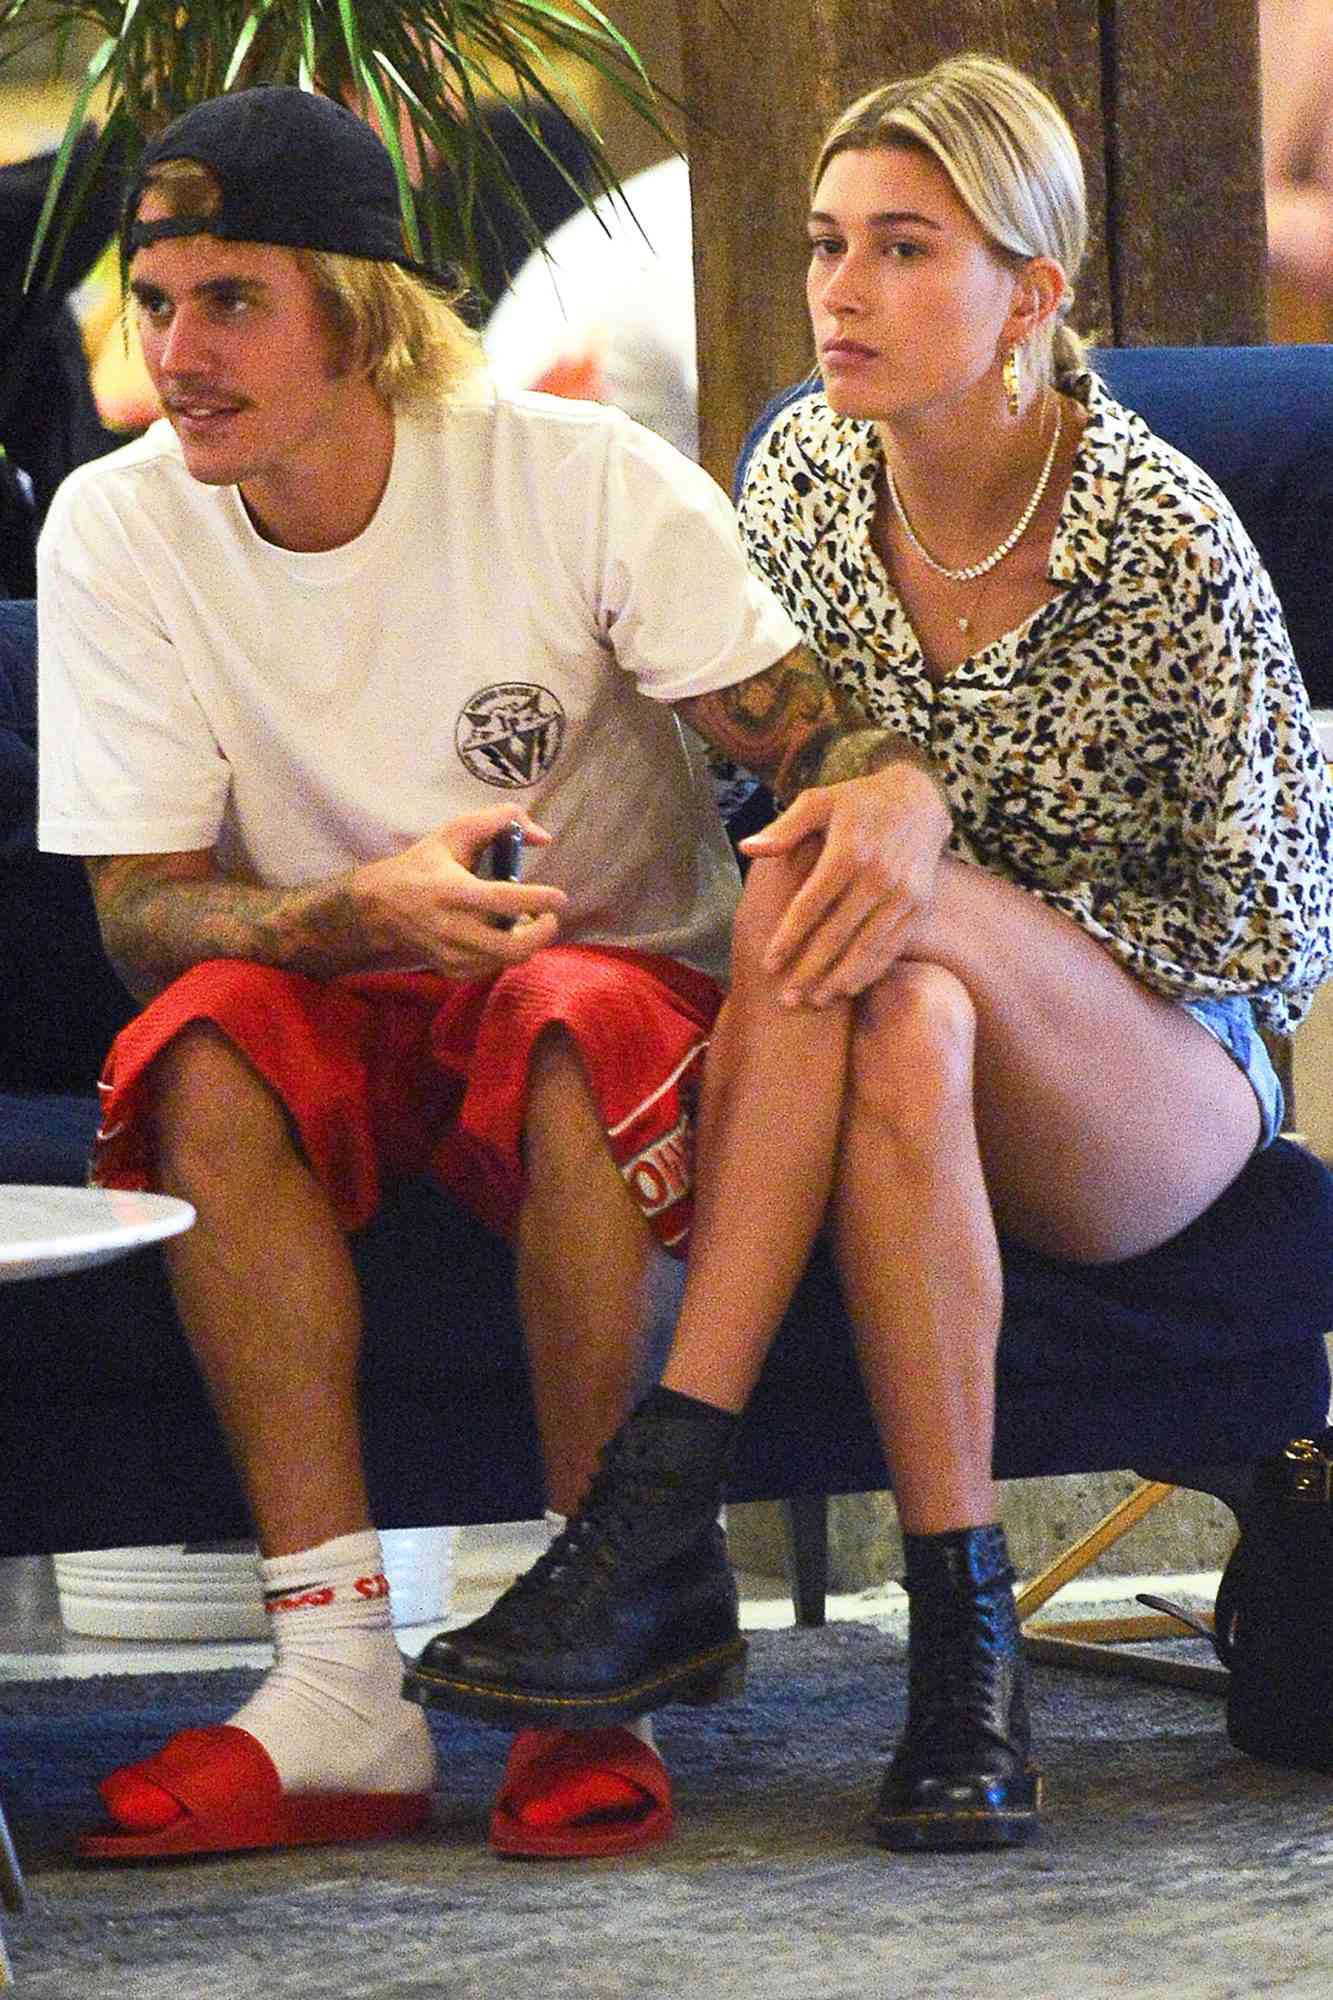 EXCLUSIVE: Justin Bieber And Hailey Baldwin Enjoy Some Time Together After Confirming Their Relationship As They Hang Out In Brooklyn